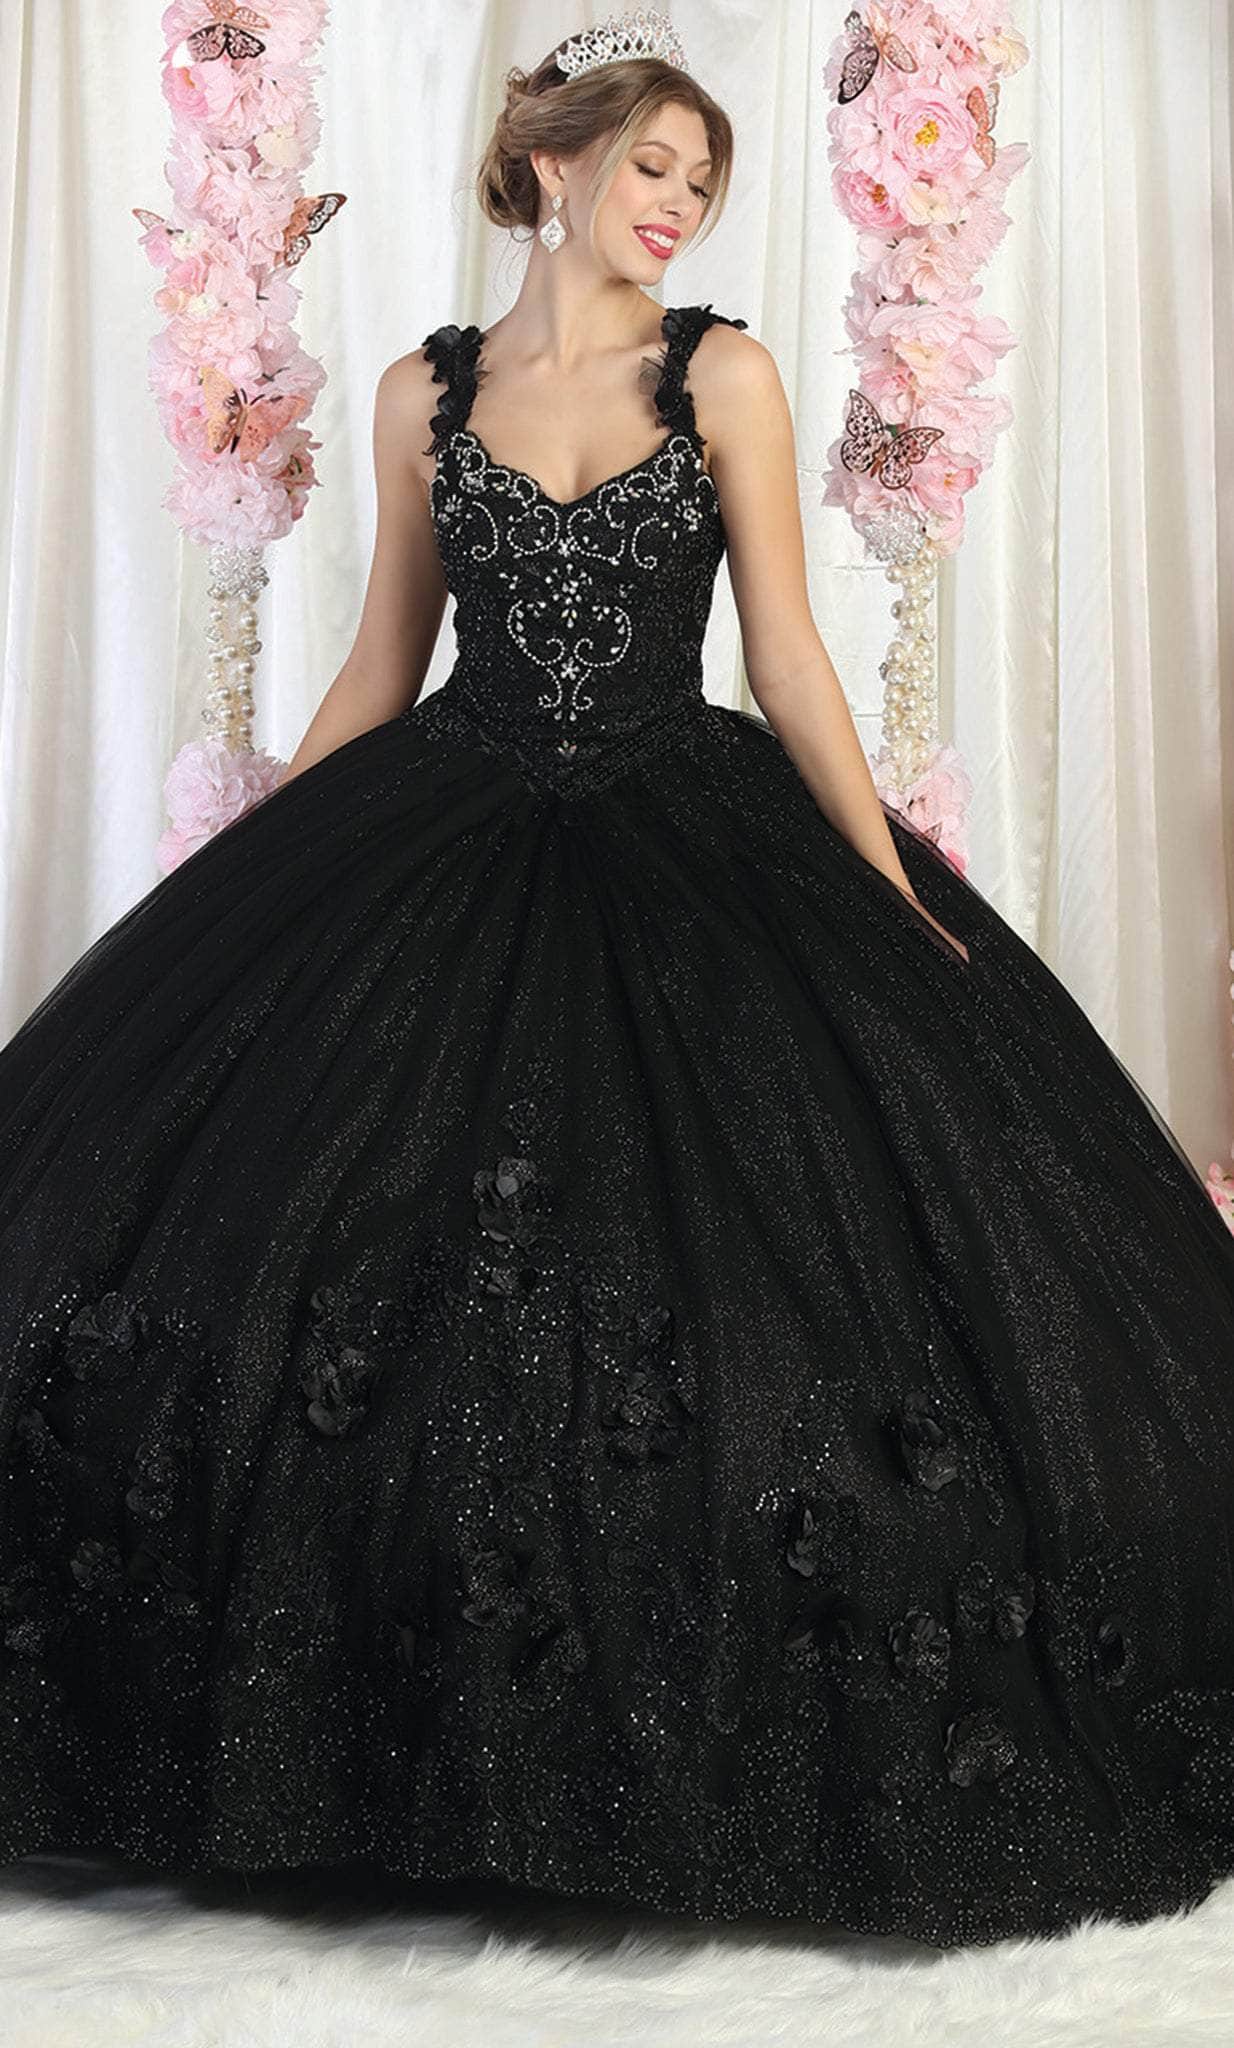 May Queen LK180 - Floral Applique Quinceanera Ballgown Ball Gowns 4 / Black